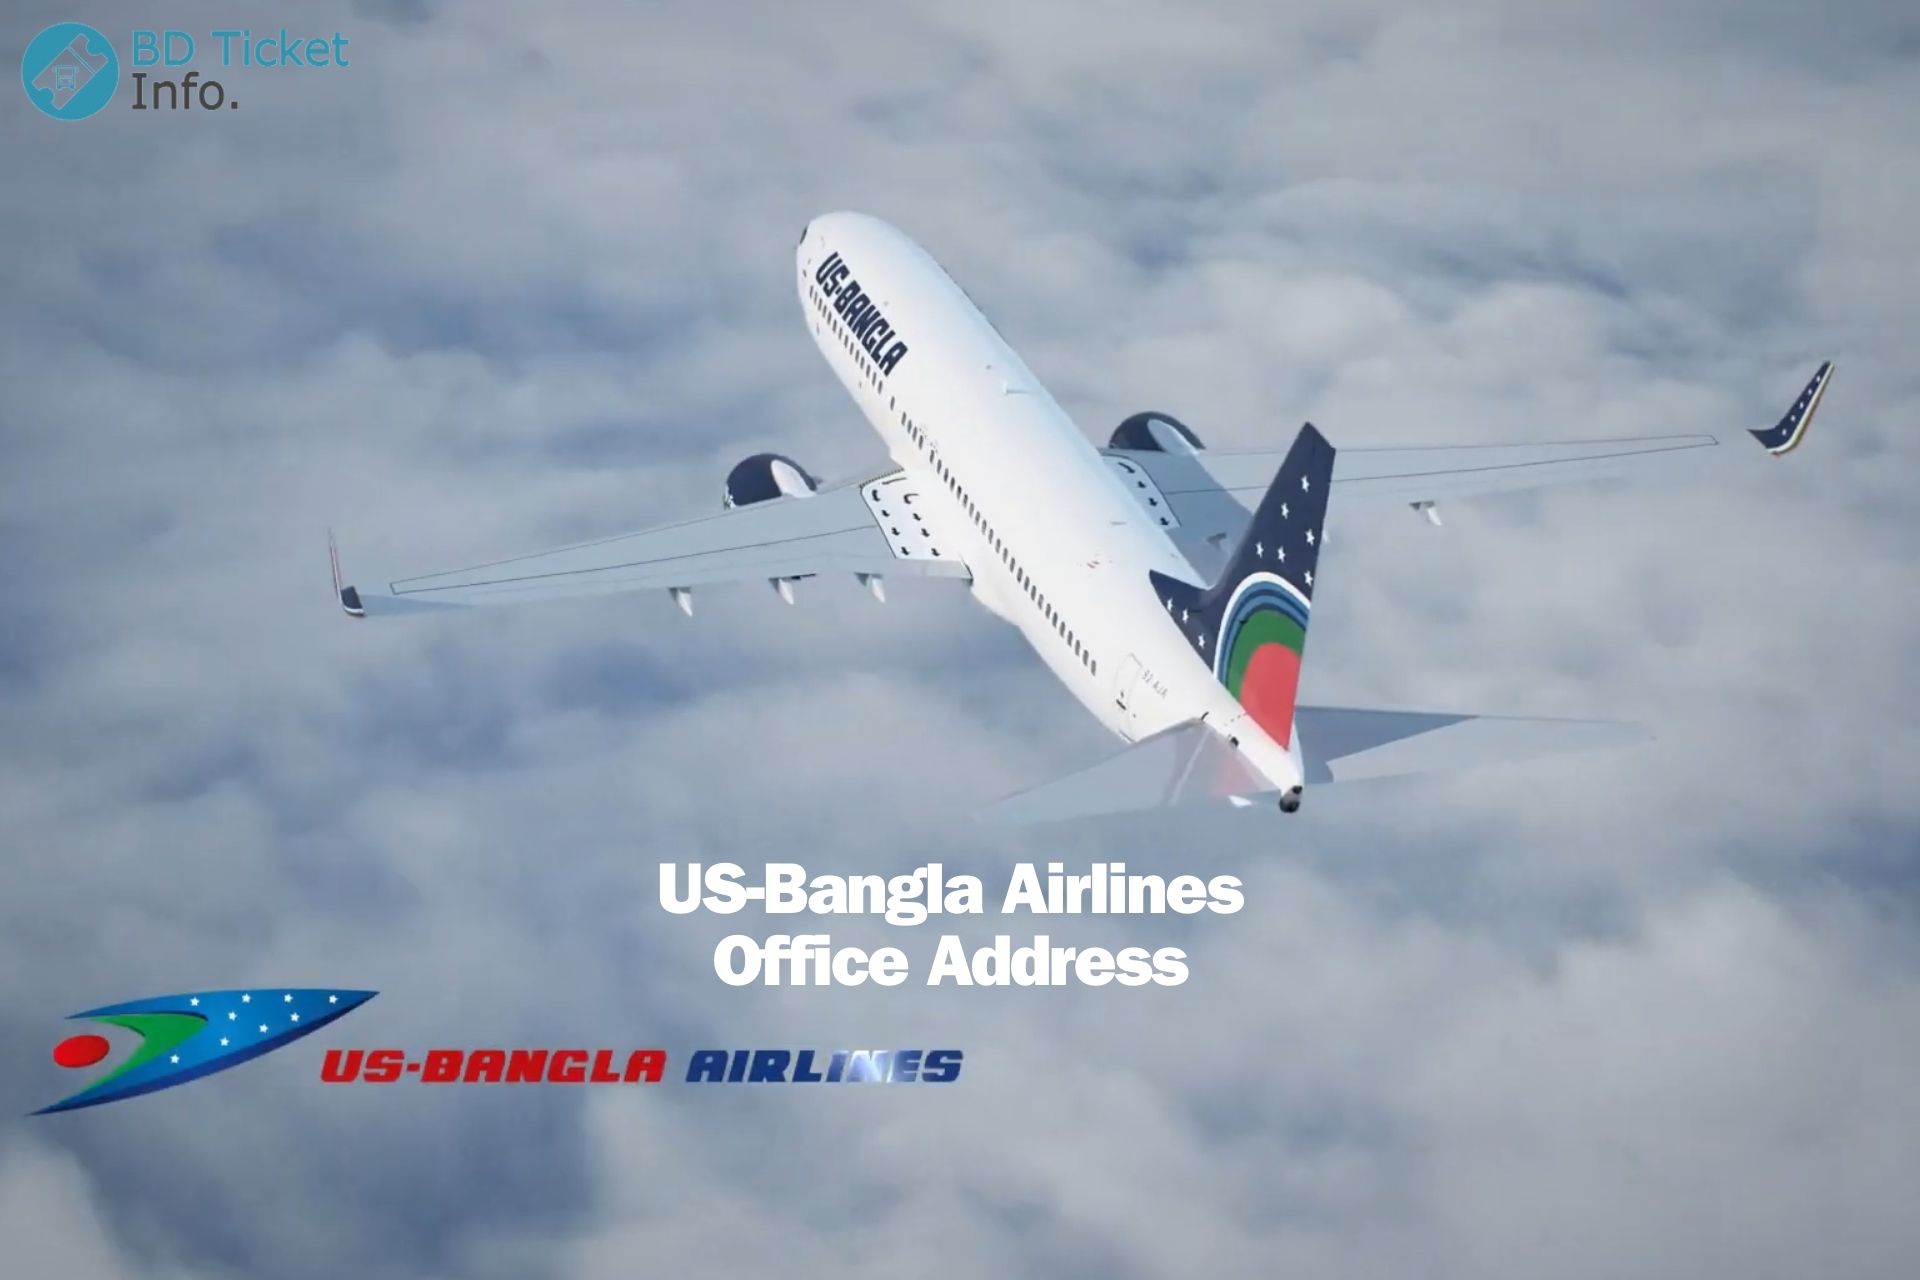 US-Bangla Airlines Office Address, Contact Number & Ticketing